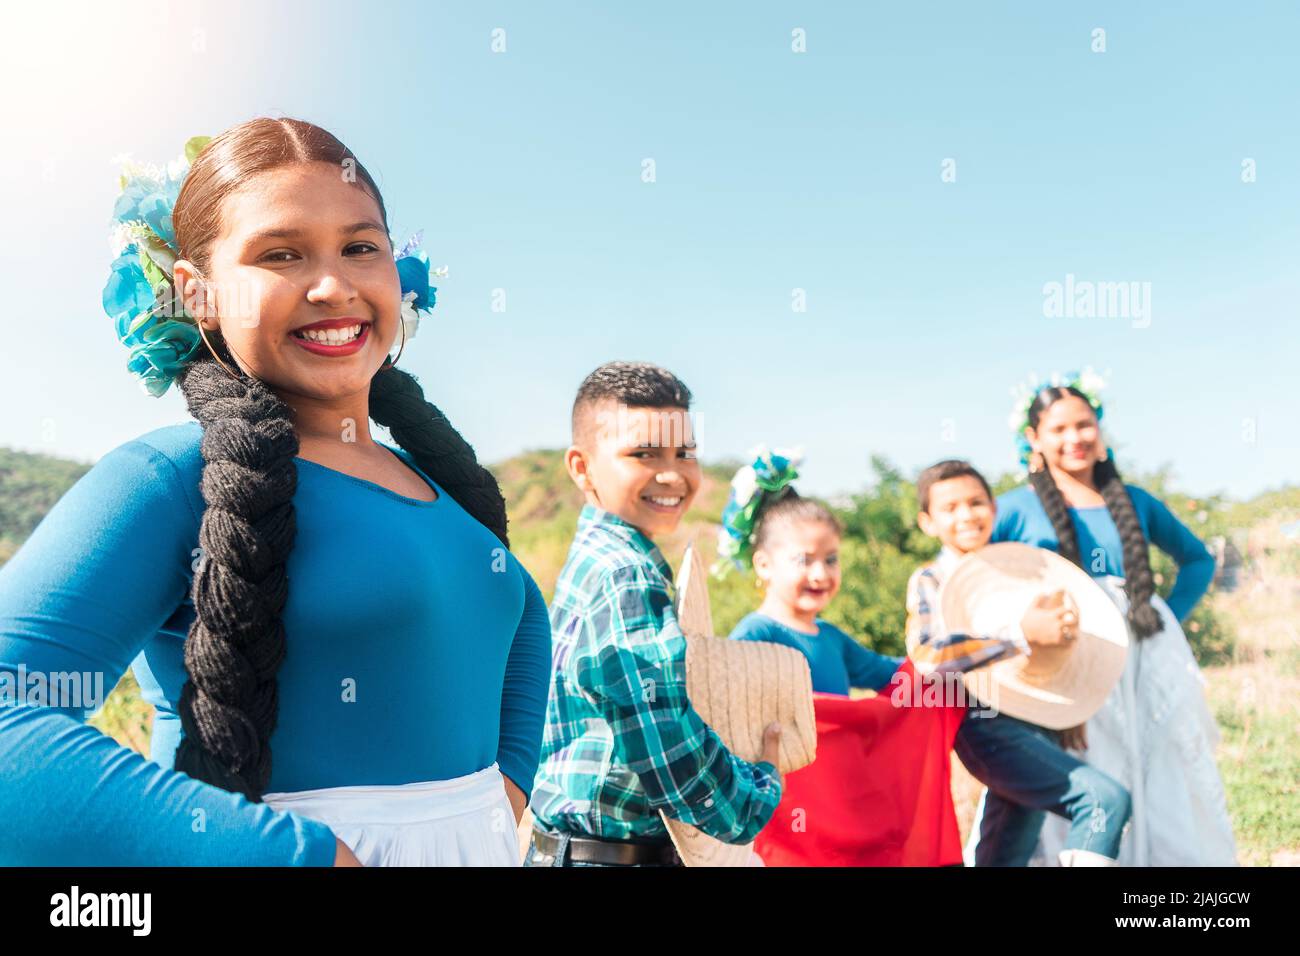 Group of Latino teens, men and women, dressed in traditional country clothing posing on a mountain in Nicaragua smiling Stock Photo